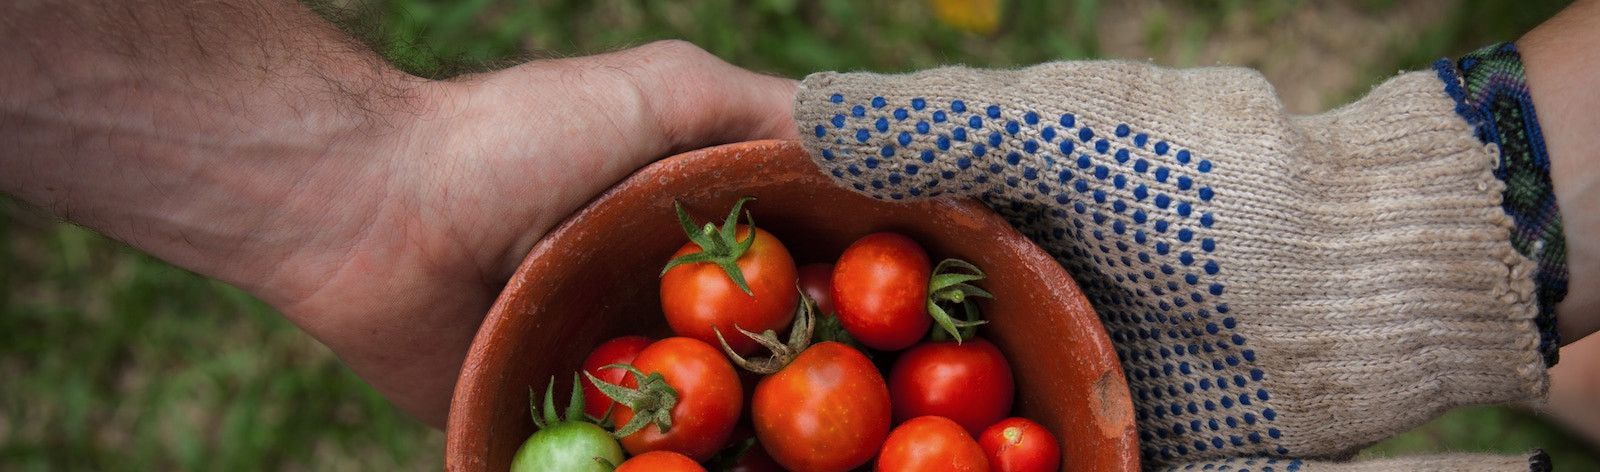 Aerial photo of two hands holding a small bowl of red and green cherry tomatoes. The hands belong to two different people. The left hand is bare and the right hand has a grey gardening glove with blue dots on it. The background is blurred green foliage.